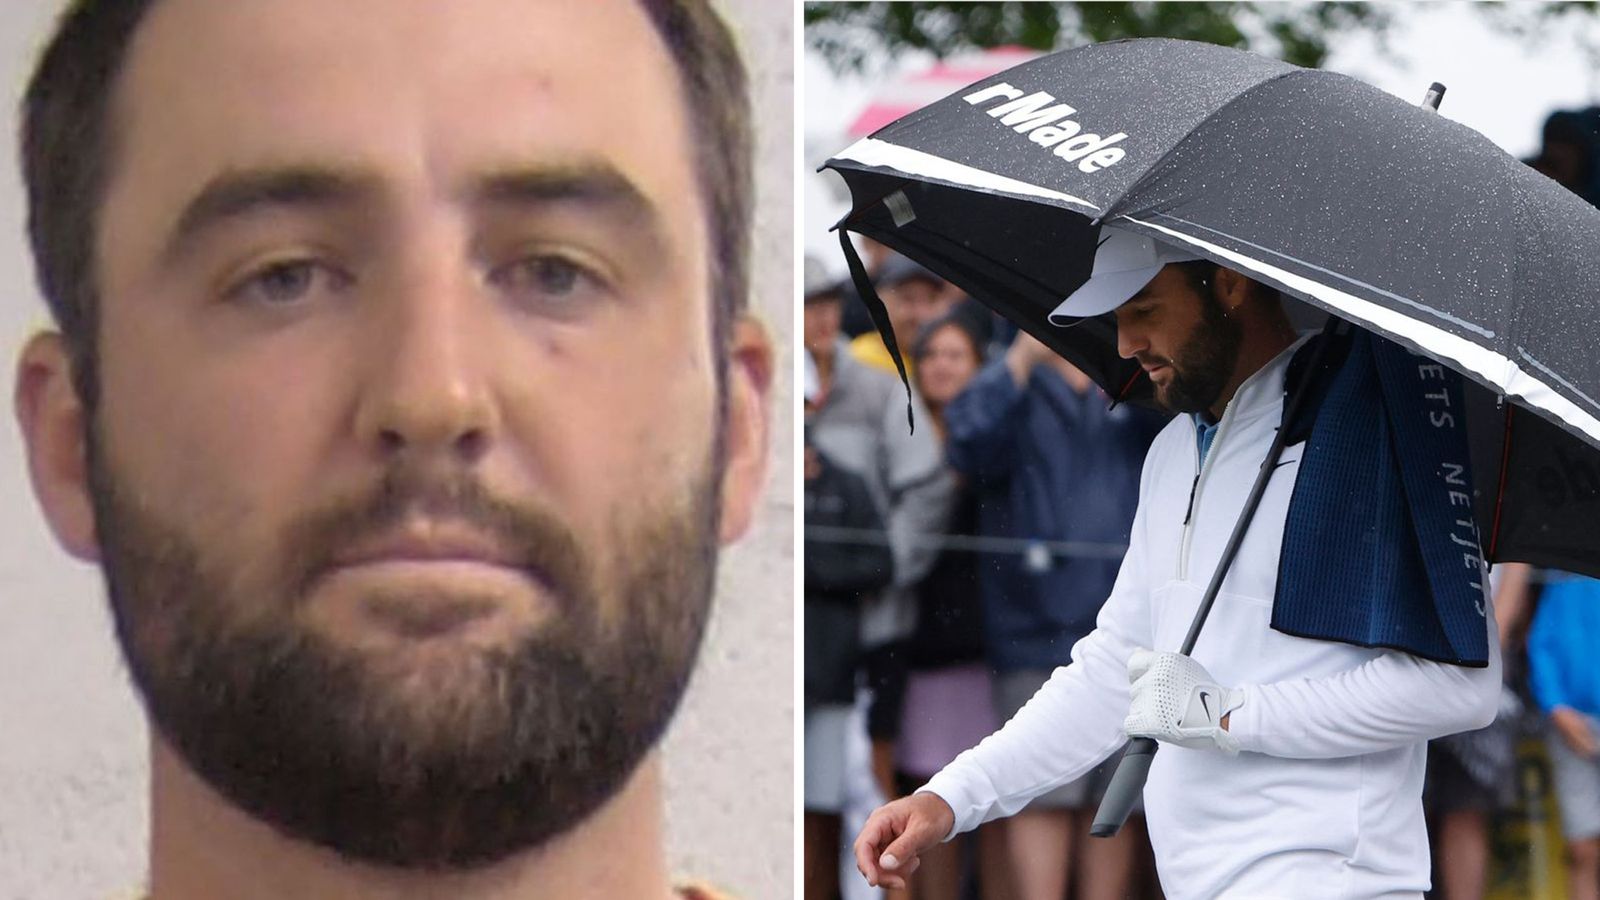 Scottie Scheffler: World number one golfer plays major tournament hours after being handcuffed and charged by police